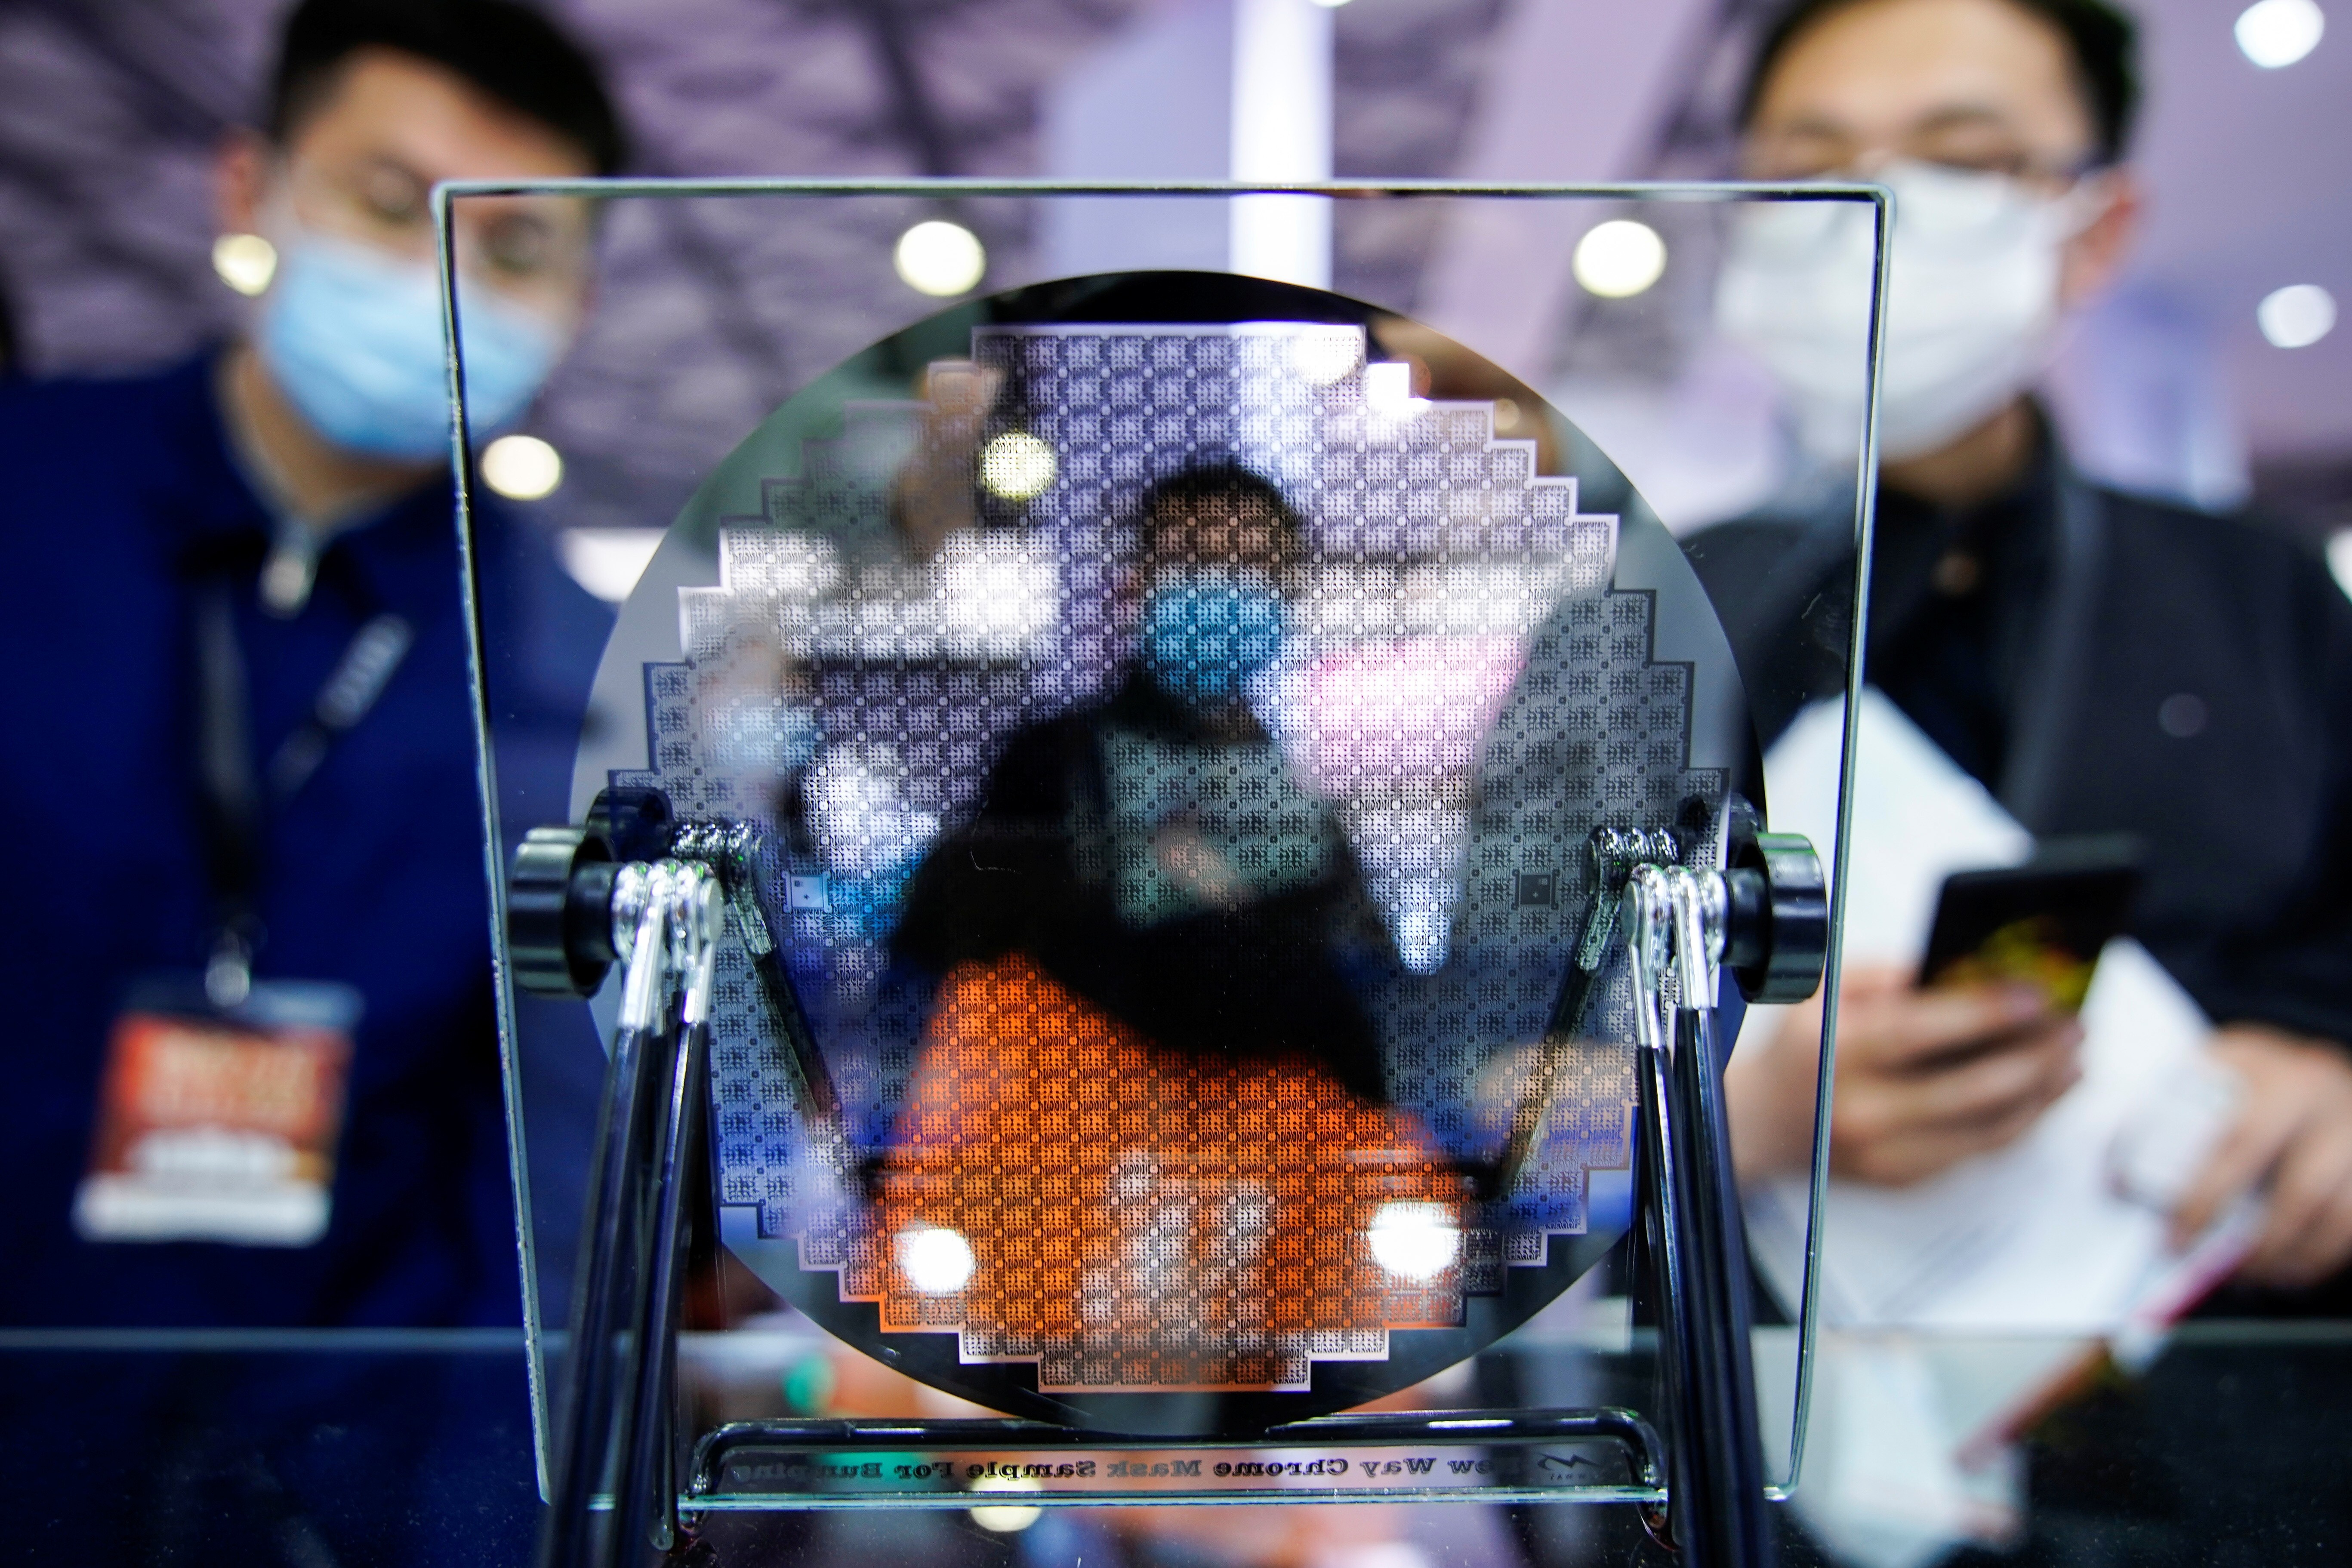 Visitors look at a display of a semiconductor device at a trade fair for semiconductor technology, in Shanghai, China. Photo: Reuters